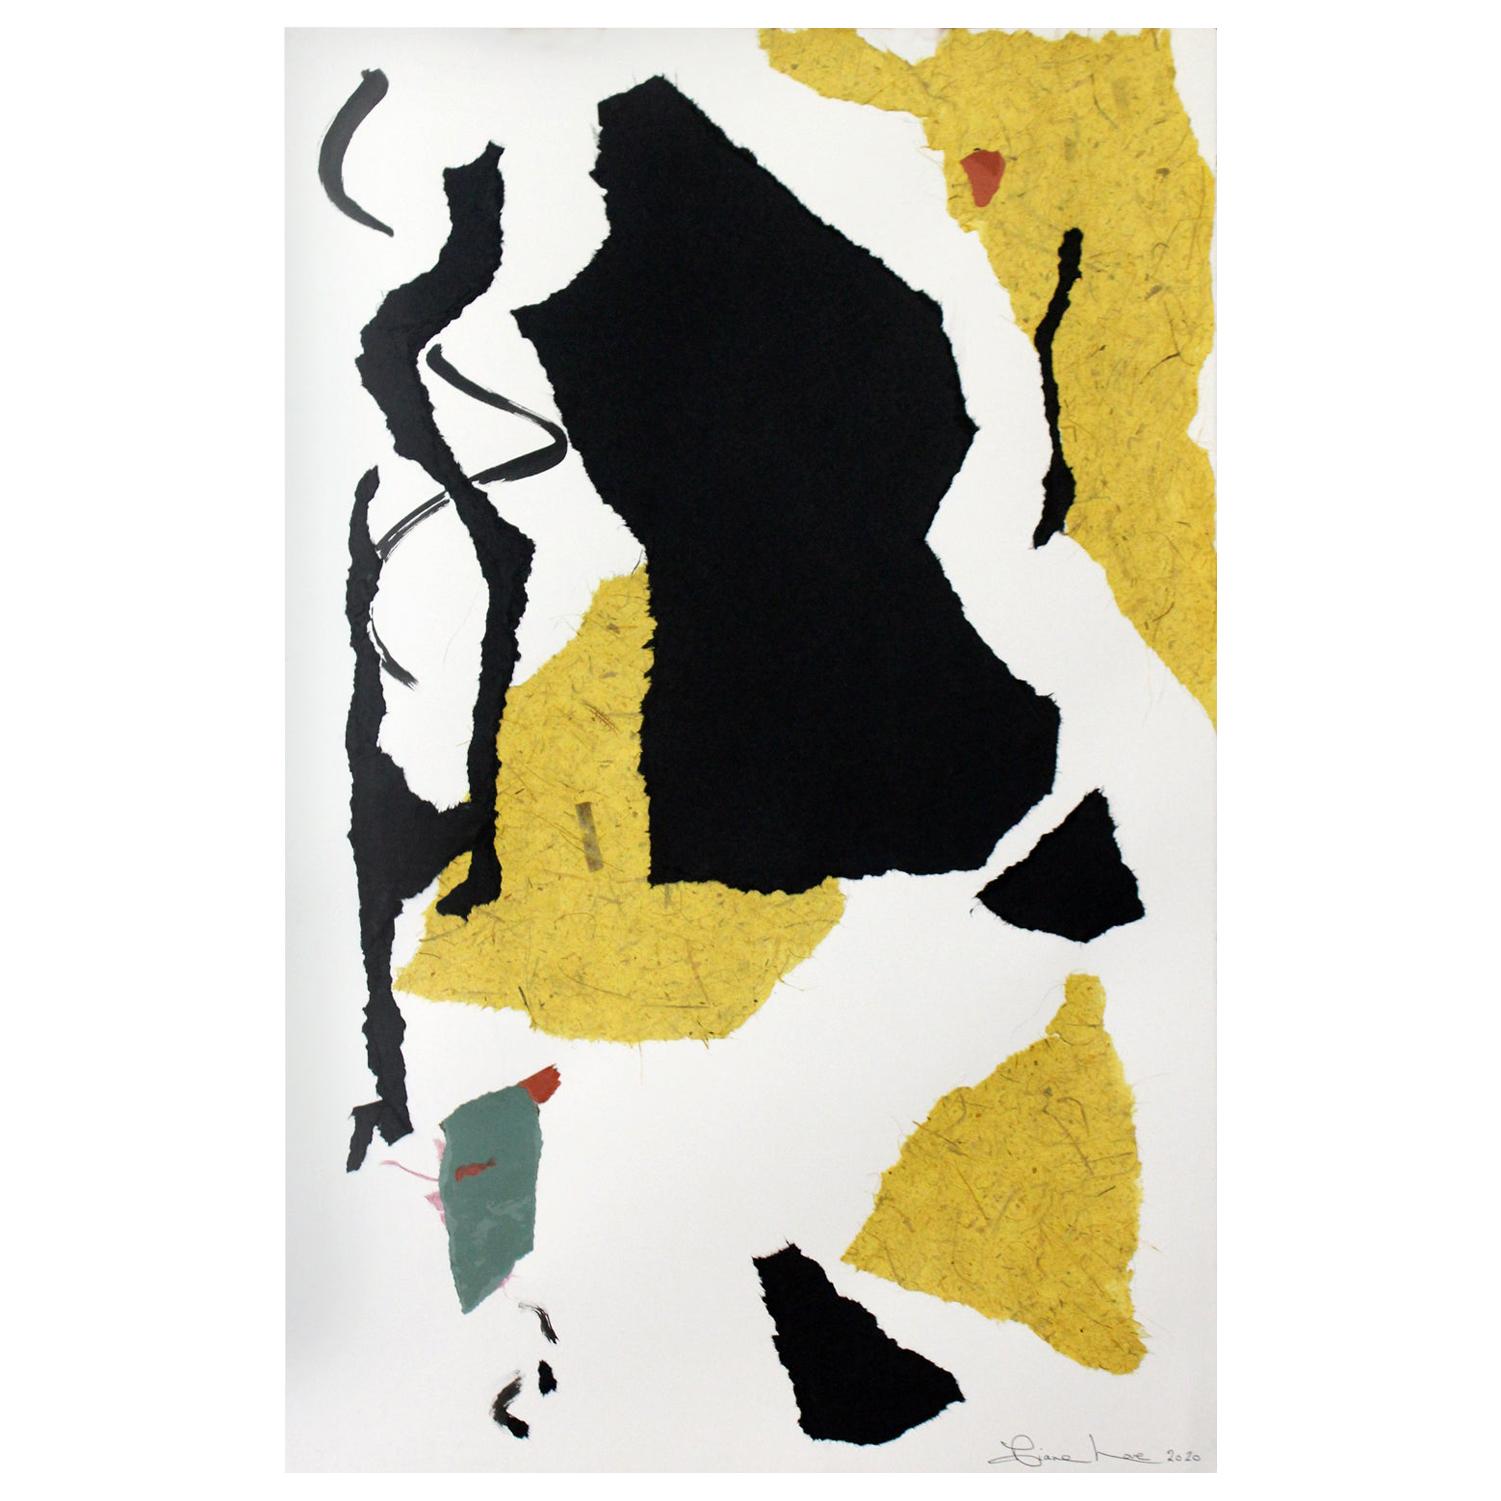 "Samba, " 2020 Abstract Collage in Black, White and Mustard by Diane Love